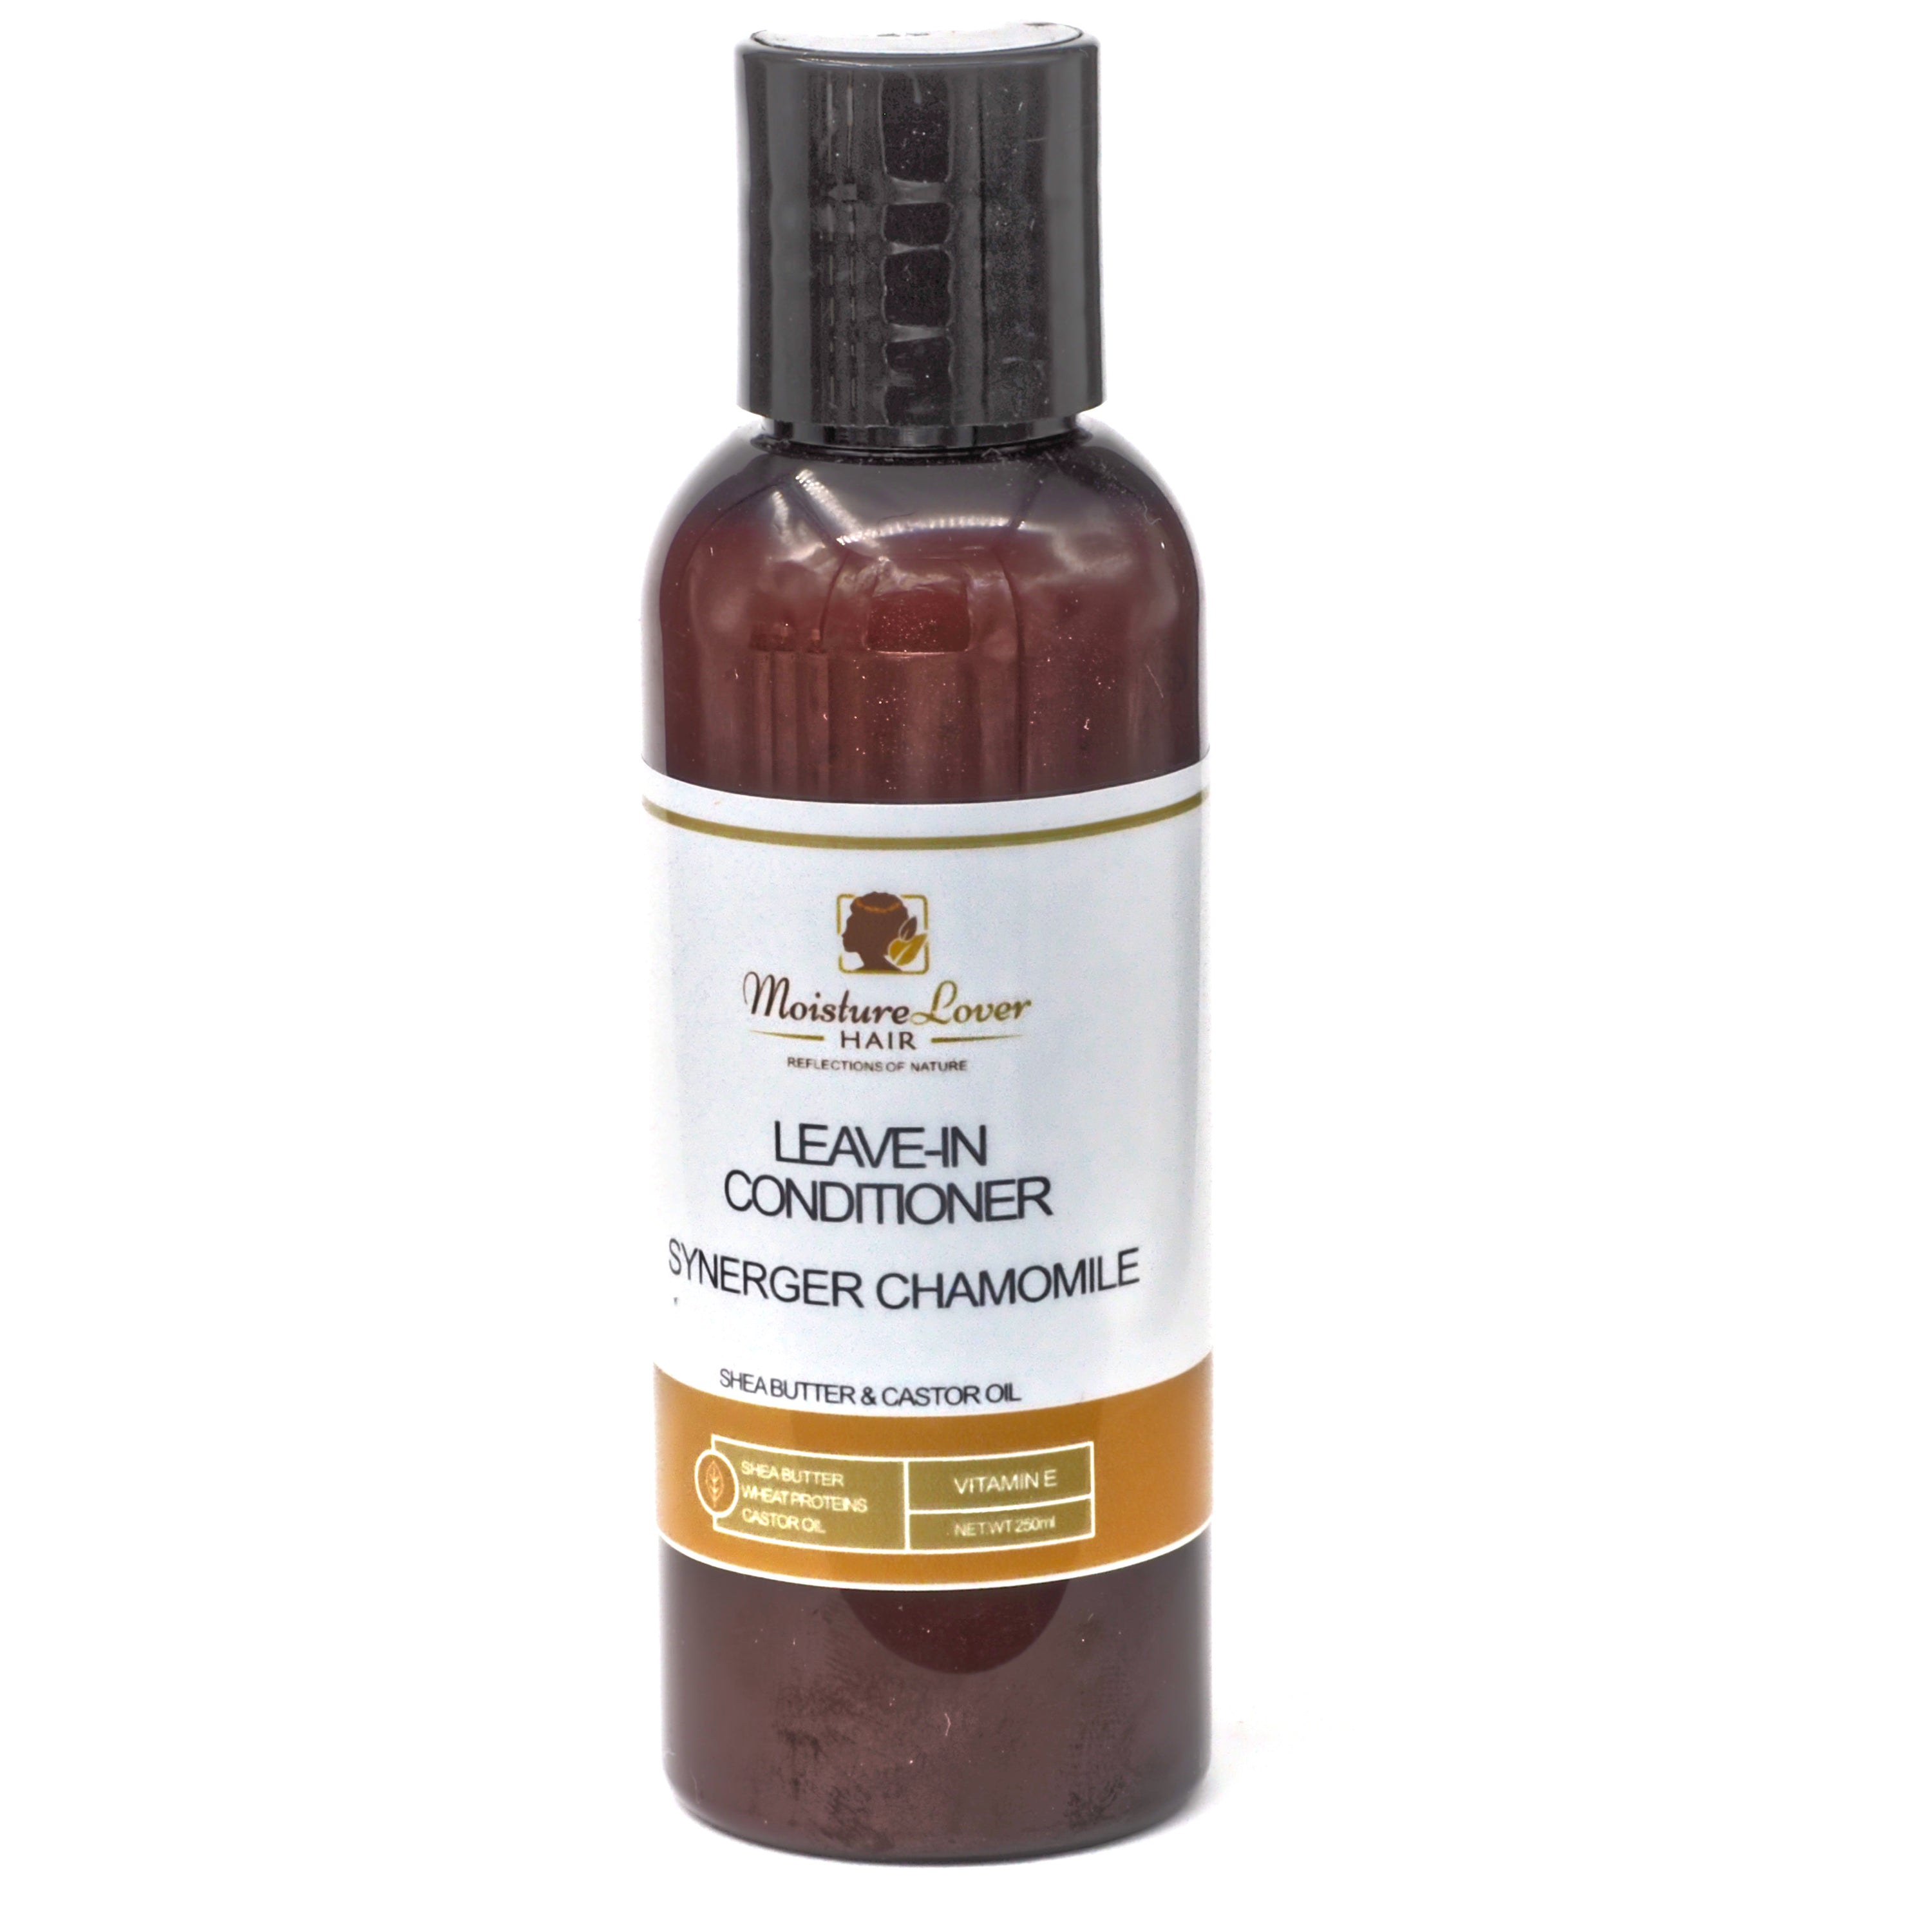 Conditioner is rich in moisturising Shea Butter, Castor Oil and Hydrolyzed Wheat Protein to help nourish, strengthen and repair dry and damaged hair - MoistureLover Hair - 